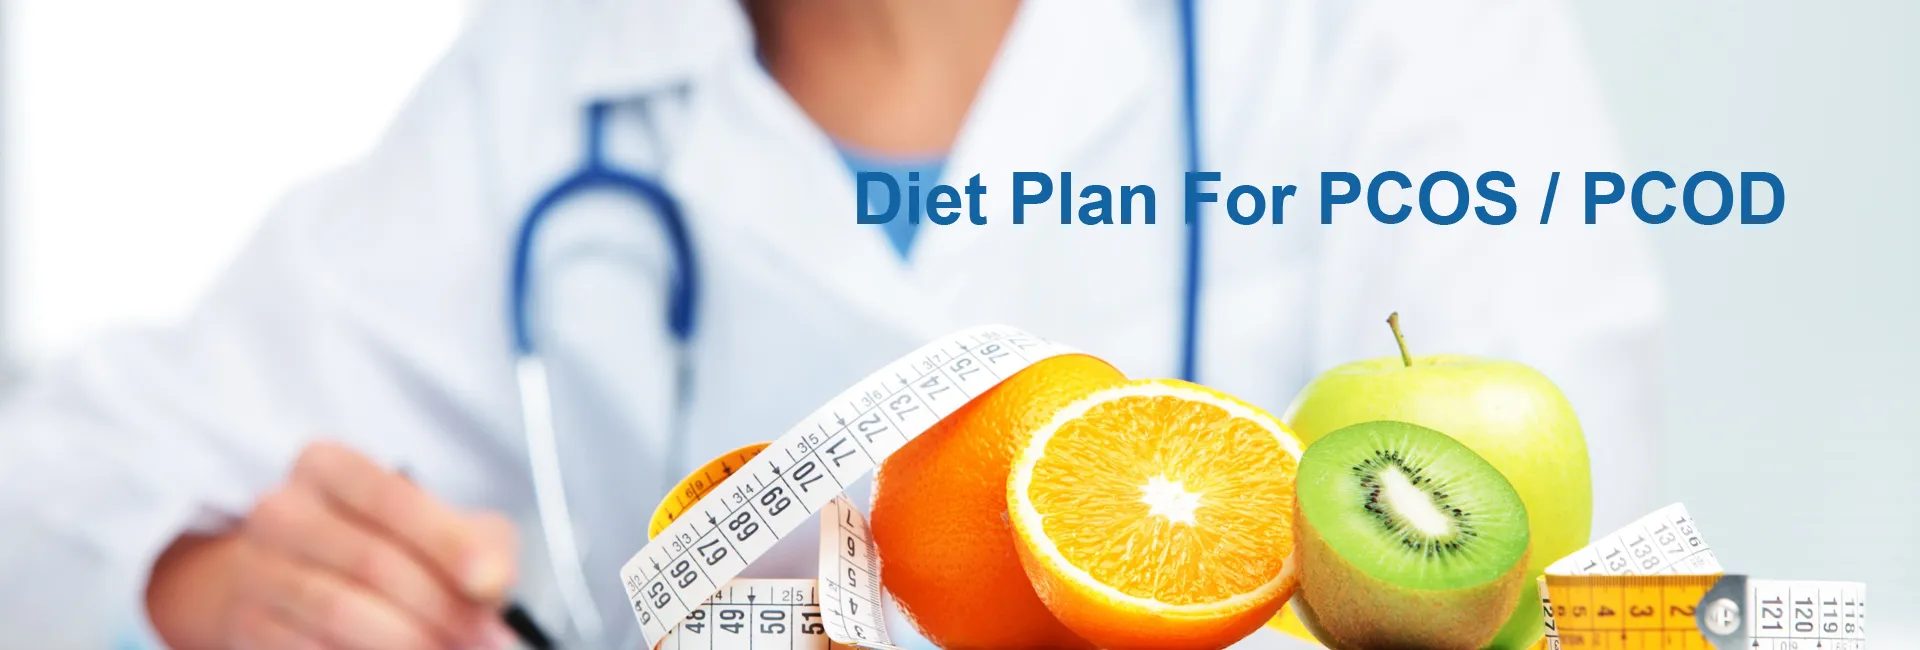 Diet Plan For PCOS / PCOD In Toronto